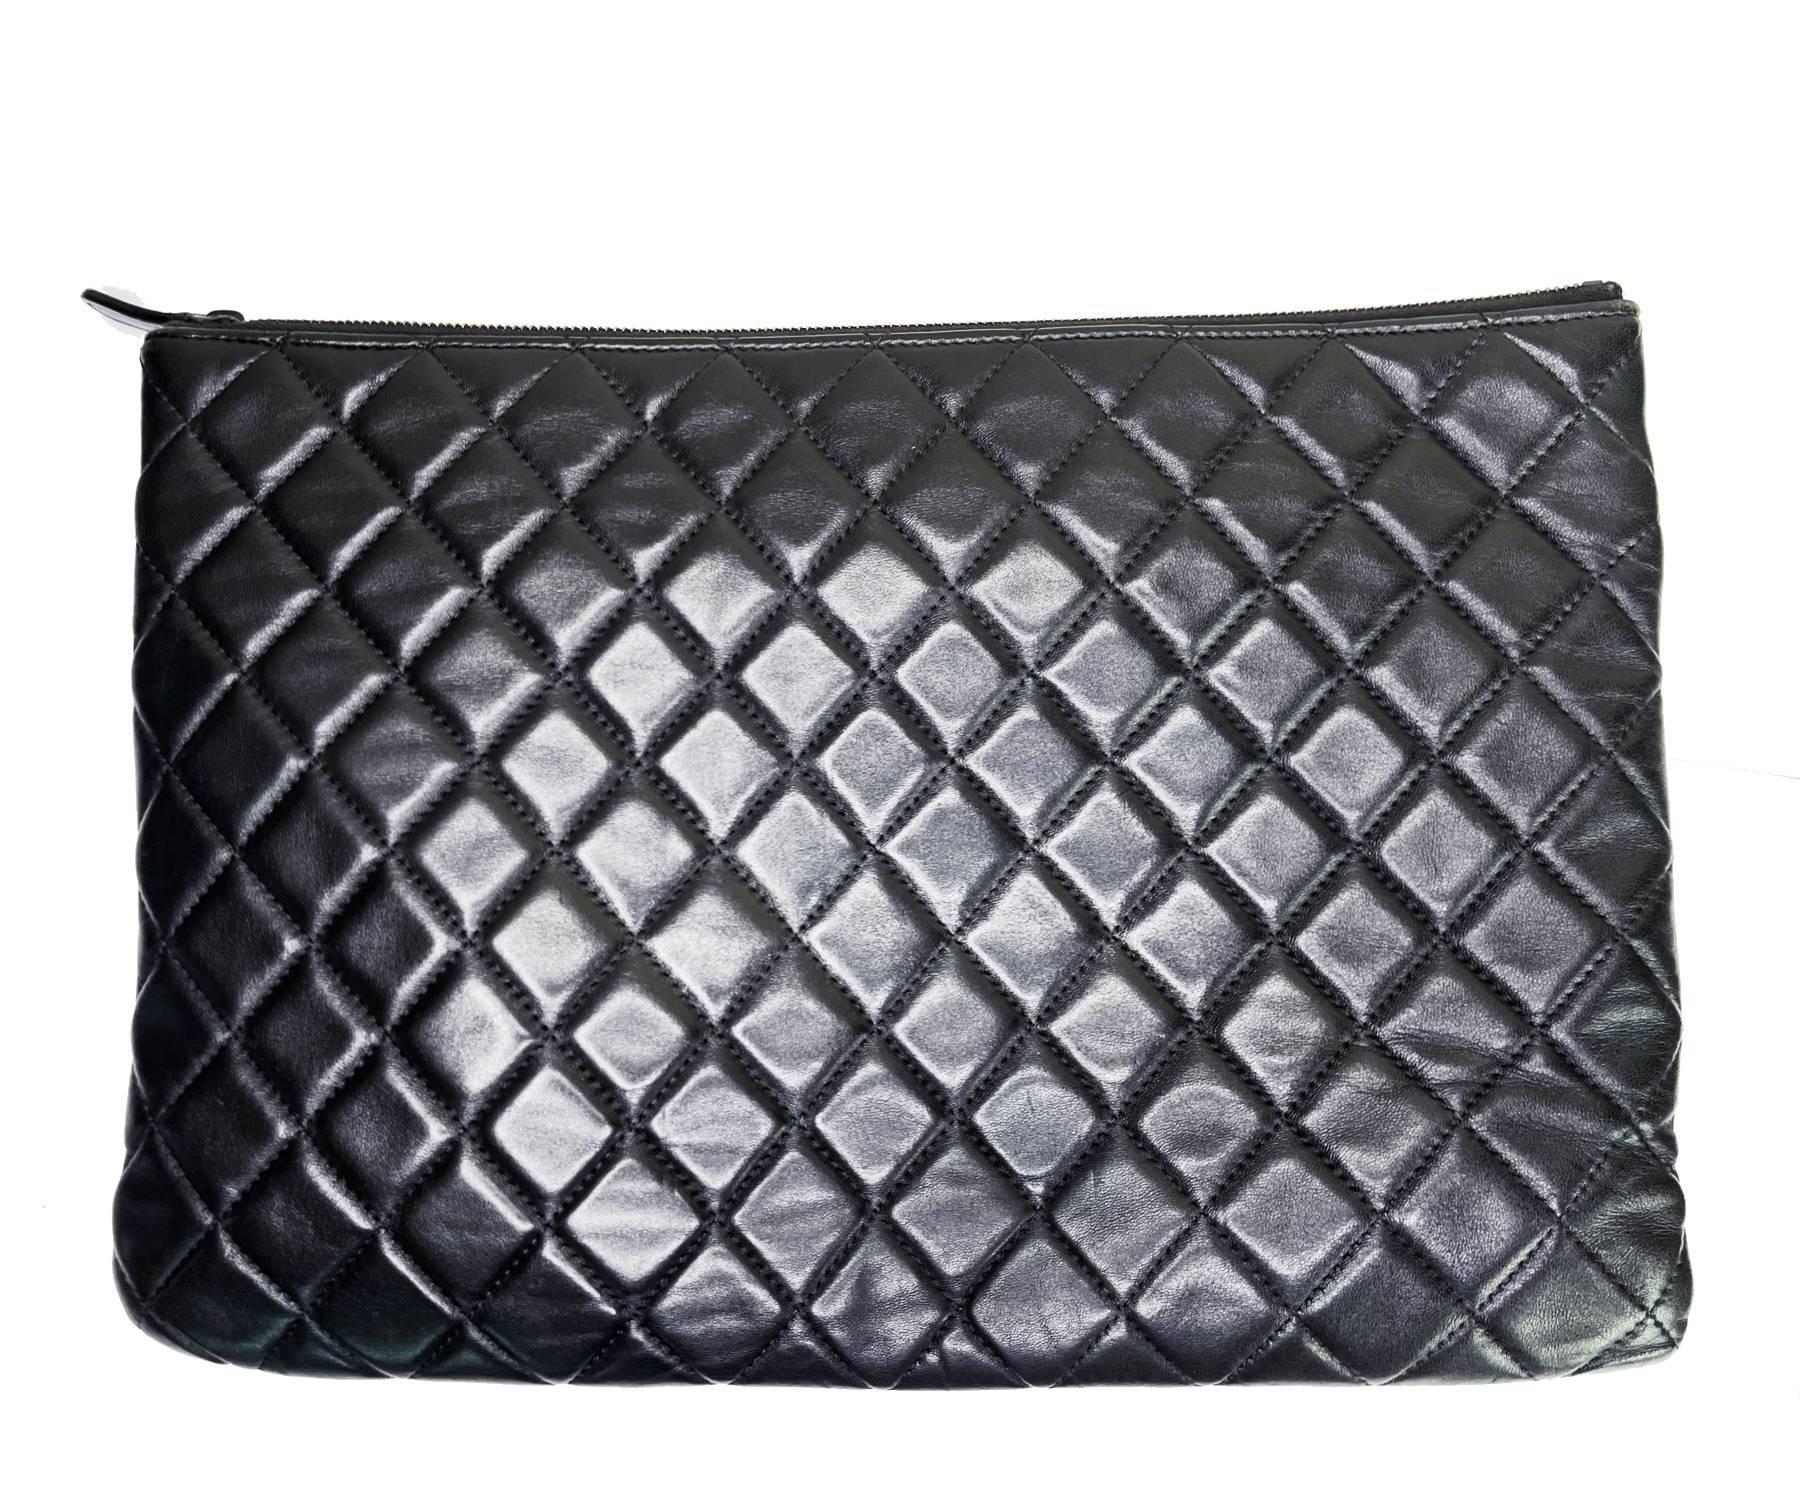 Chanel Black Leather Flap Quilted Large Clutch

*2588xxxx
*Made in Italy

-Approximately 13.5″ x 9″ x 0.5″
-The shape is loose. It shows normal signs of wear.
-In a good condition